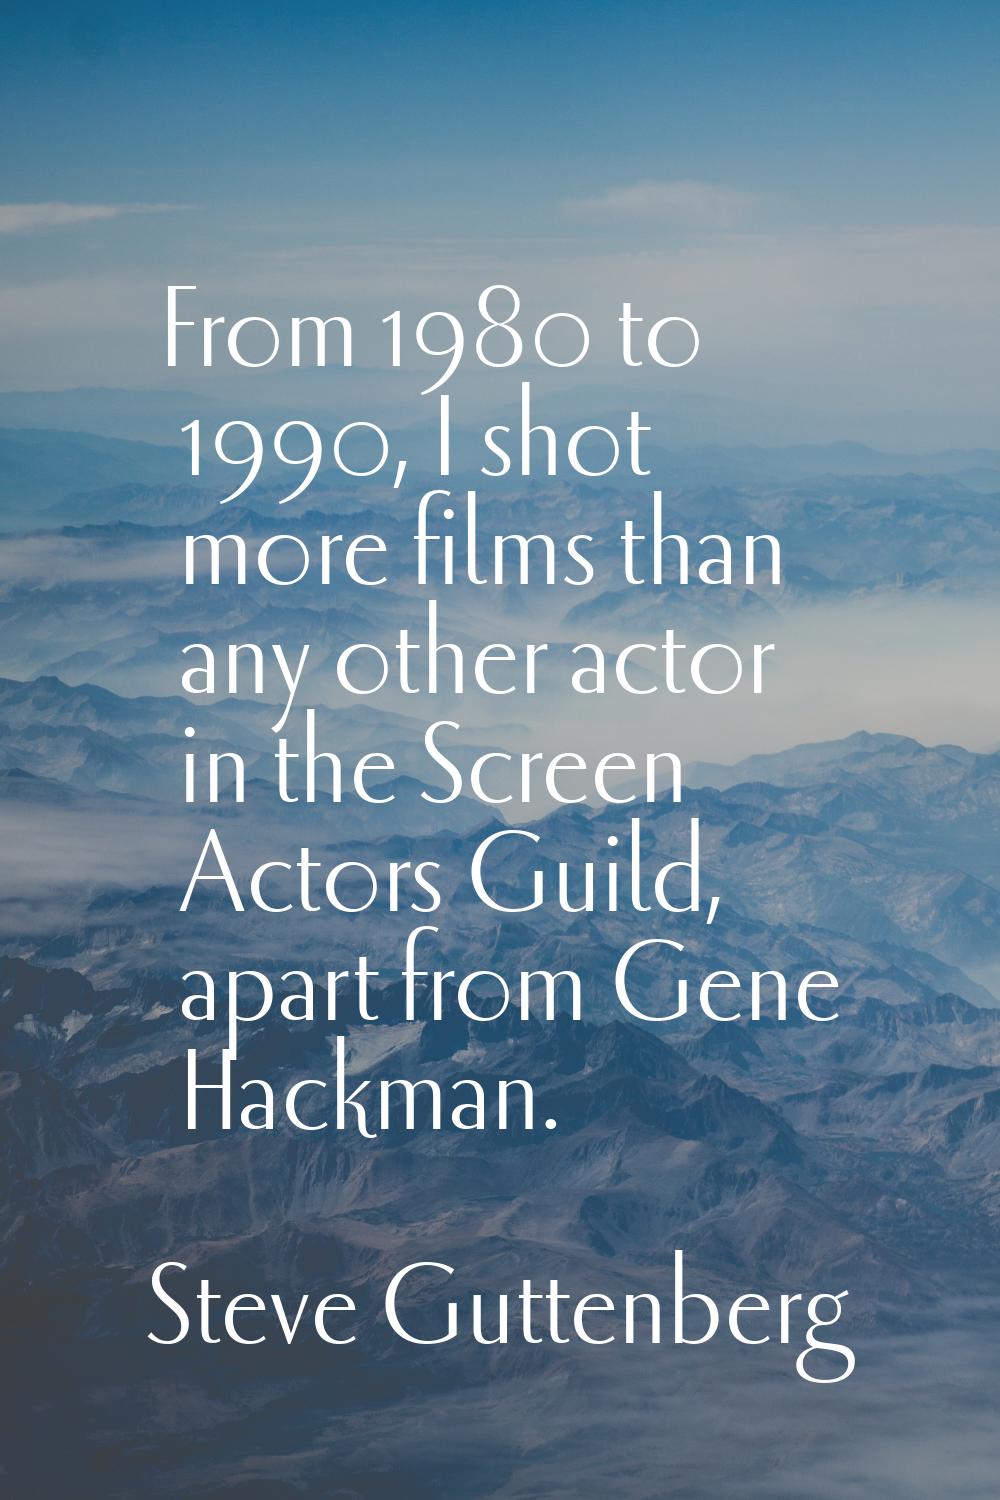 From 1980 to 1990, I shot more films than any other actor in the Screen Actors Guild, apart from Ge